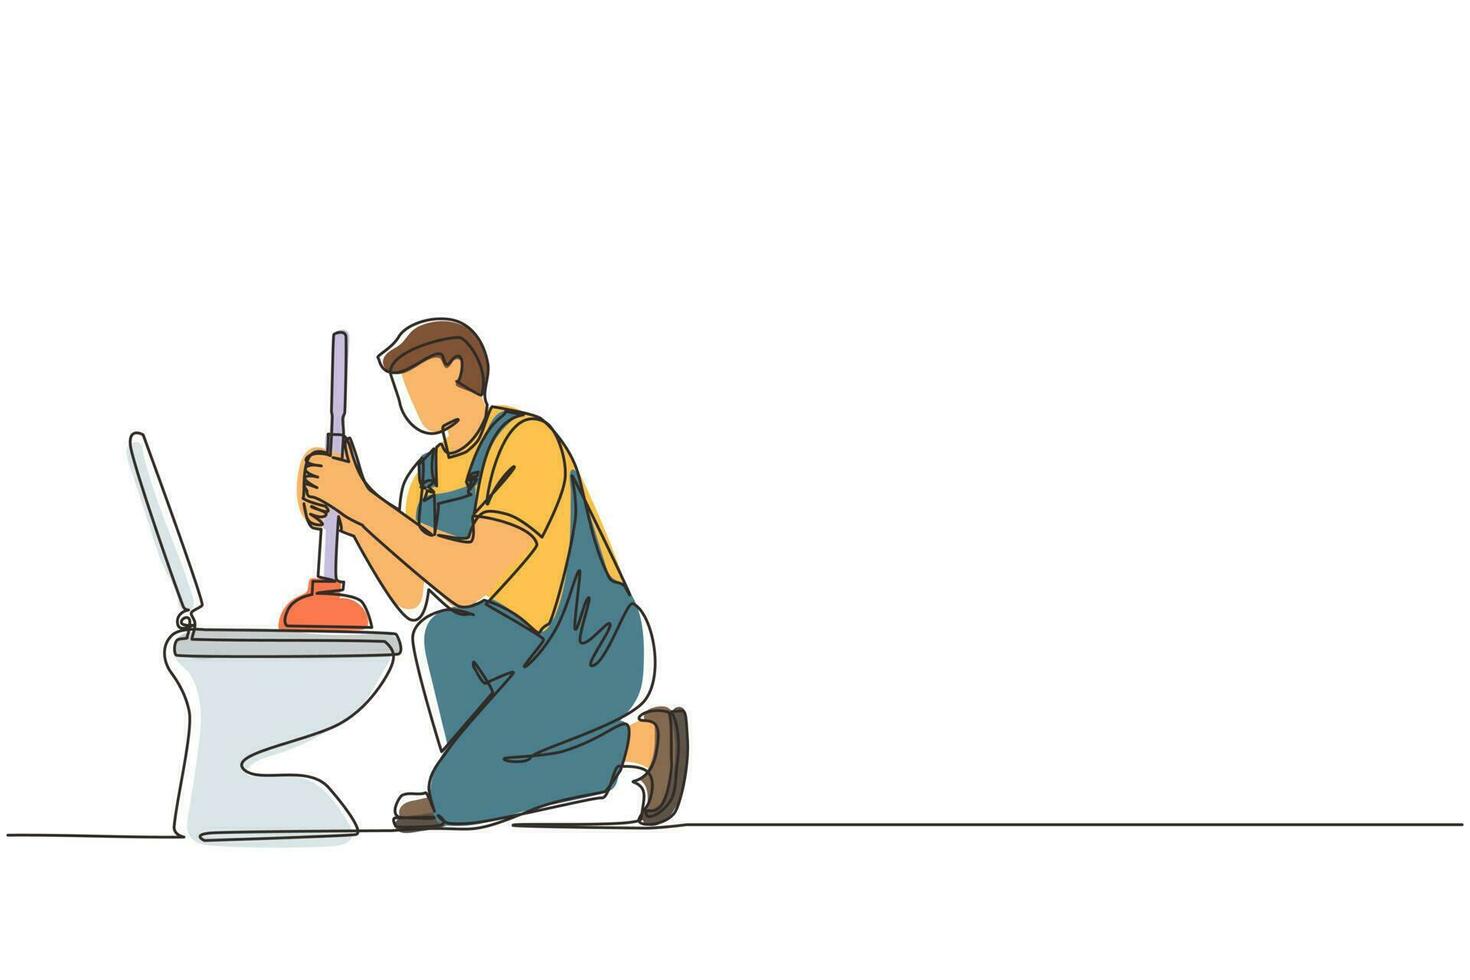 Single one line drawing toilet cleaning, plumbing service. Plumbing toilet leakage or clogging, plumber repair tools. Sewage system. Toilet bowl and sewer. Continuous line draw design graphic vector